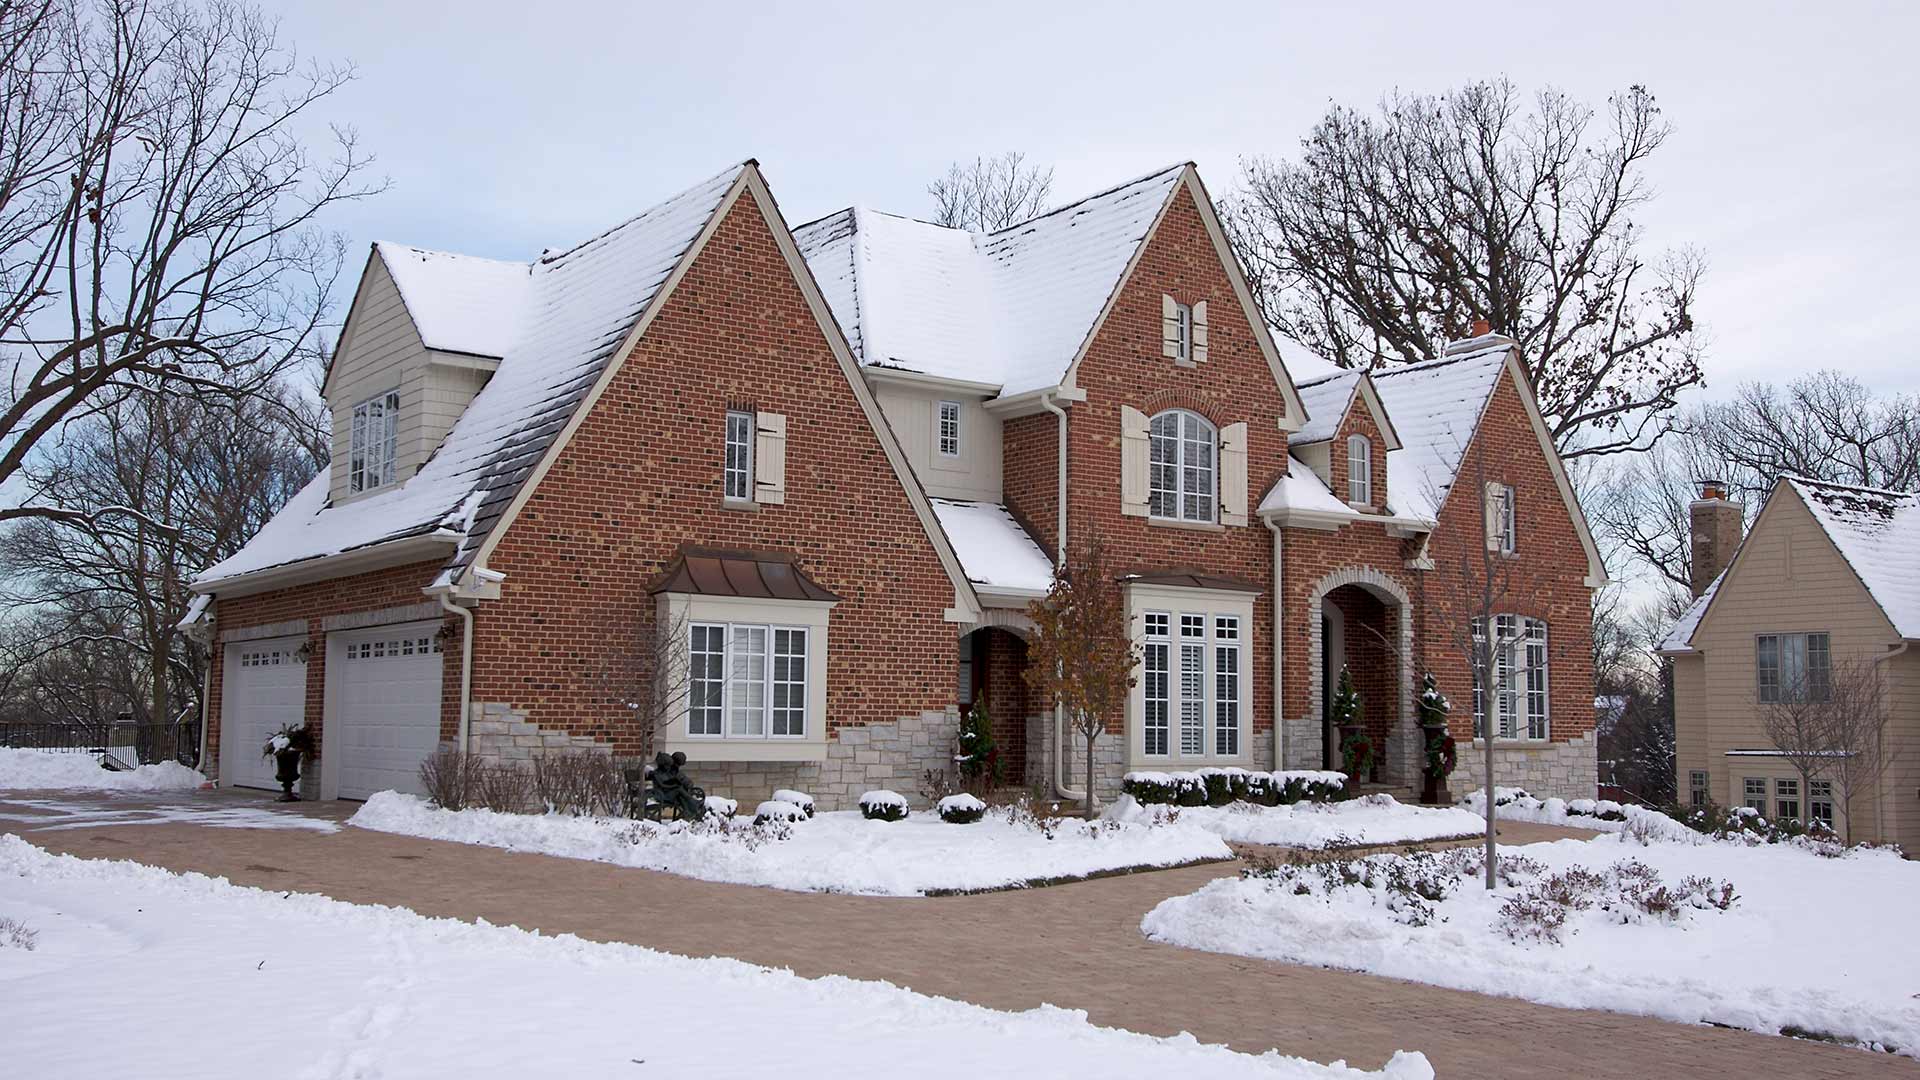 Homeowners – Stop Shoveling Your Own Snow! Hire Pros